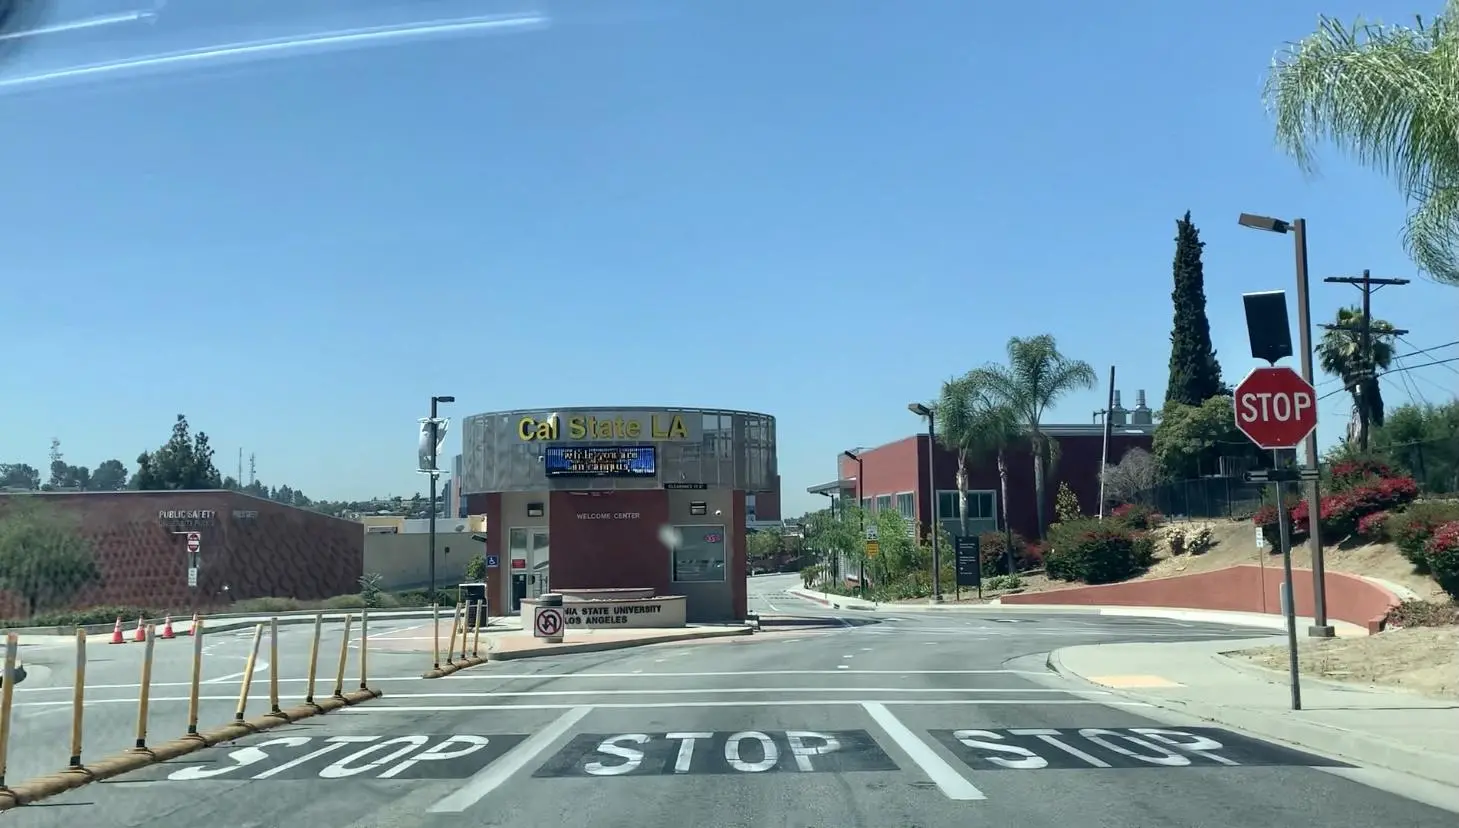 The entrance to the California State University in Los Angeles.